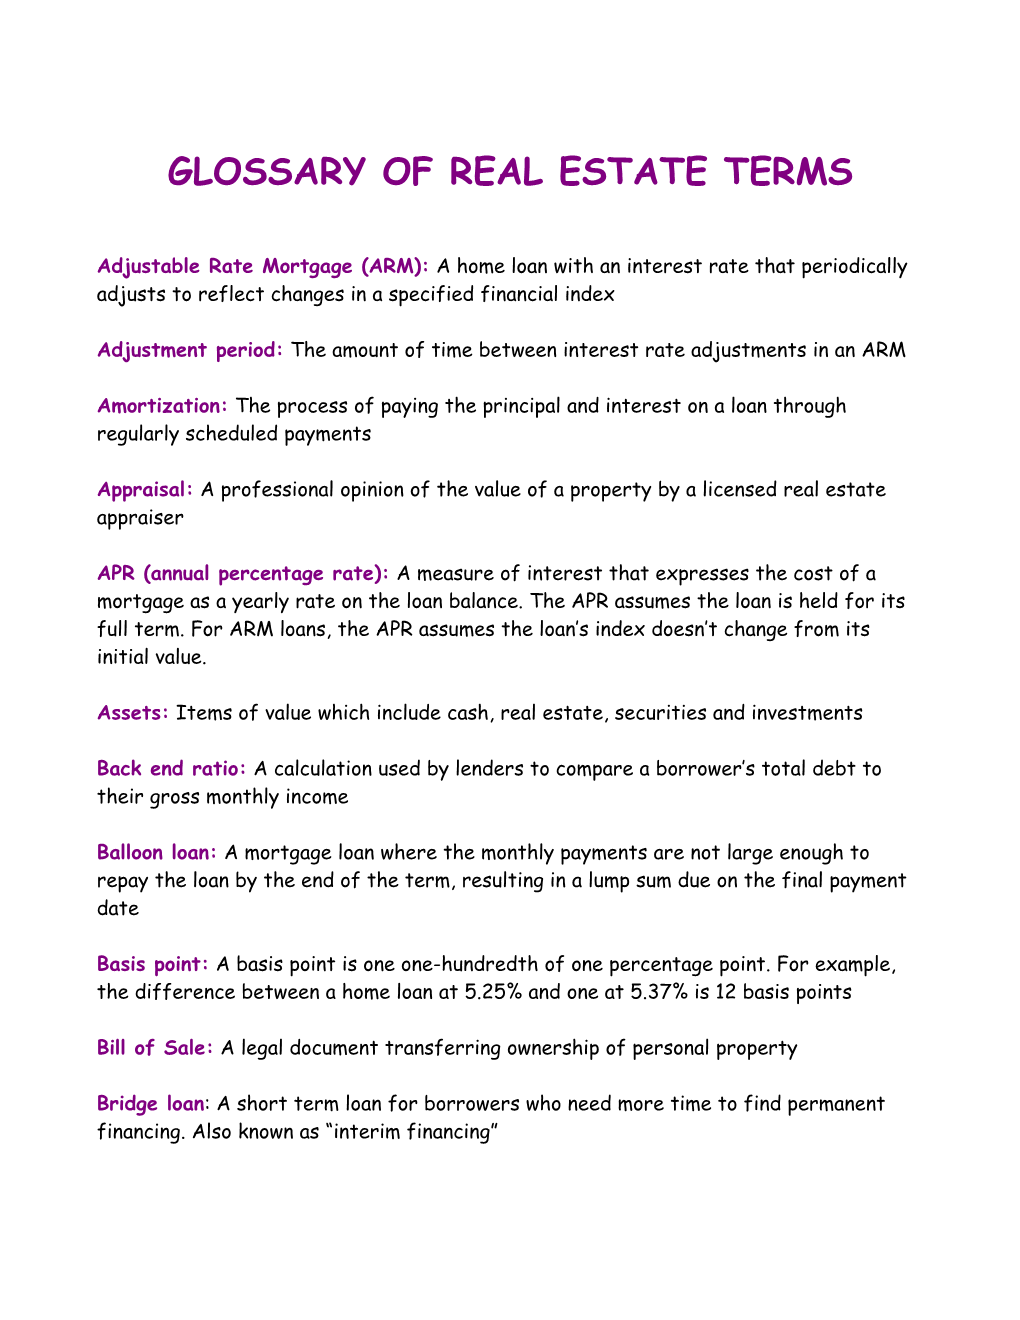 Glossary of Real Estate Terms